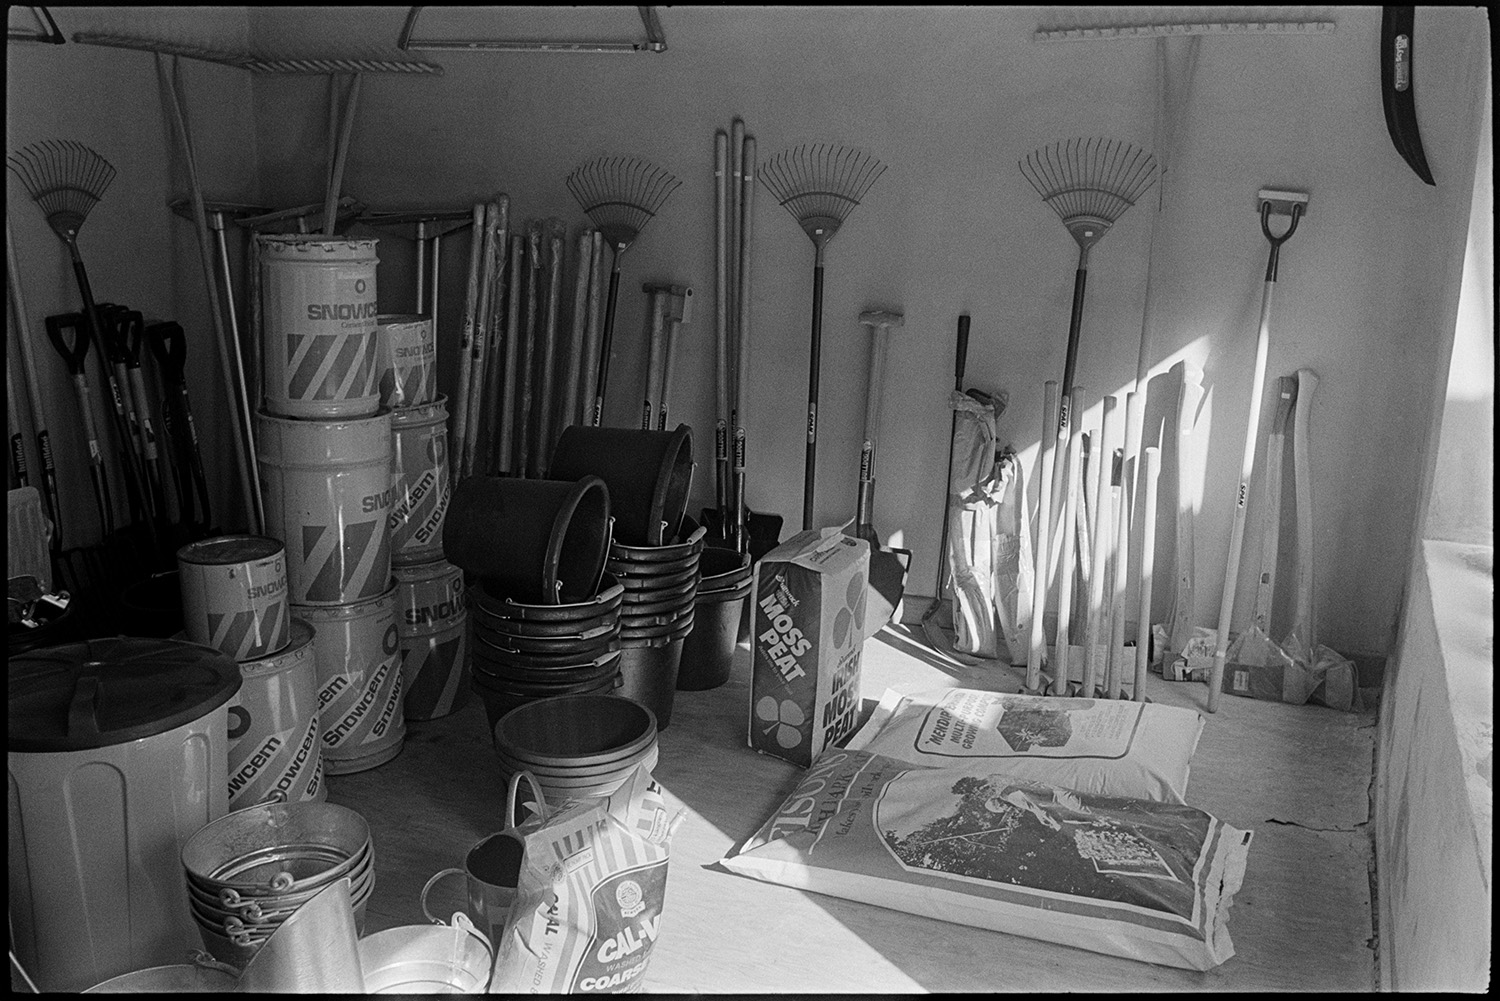 Interior of ironmongers shop, shelves with china, coal store. Proprietors at counter.
[Interior of the store room at Ellacott's ironmongery shop in Market Street, Hatherleigh. Garden tools are propped against the wall, with paint tins, buckets, and plastic bags of compost on the floor.]